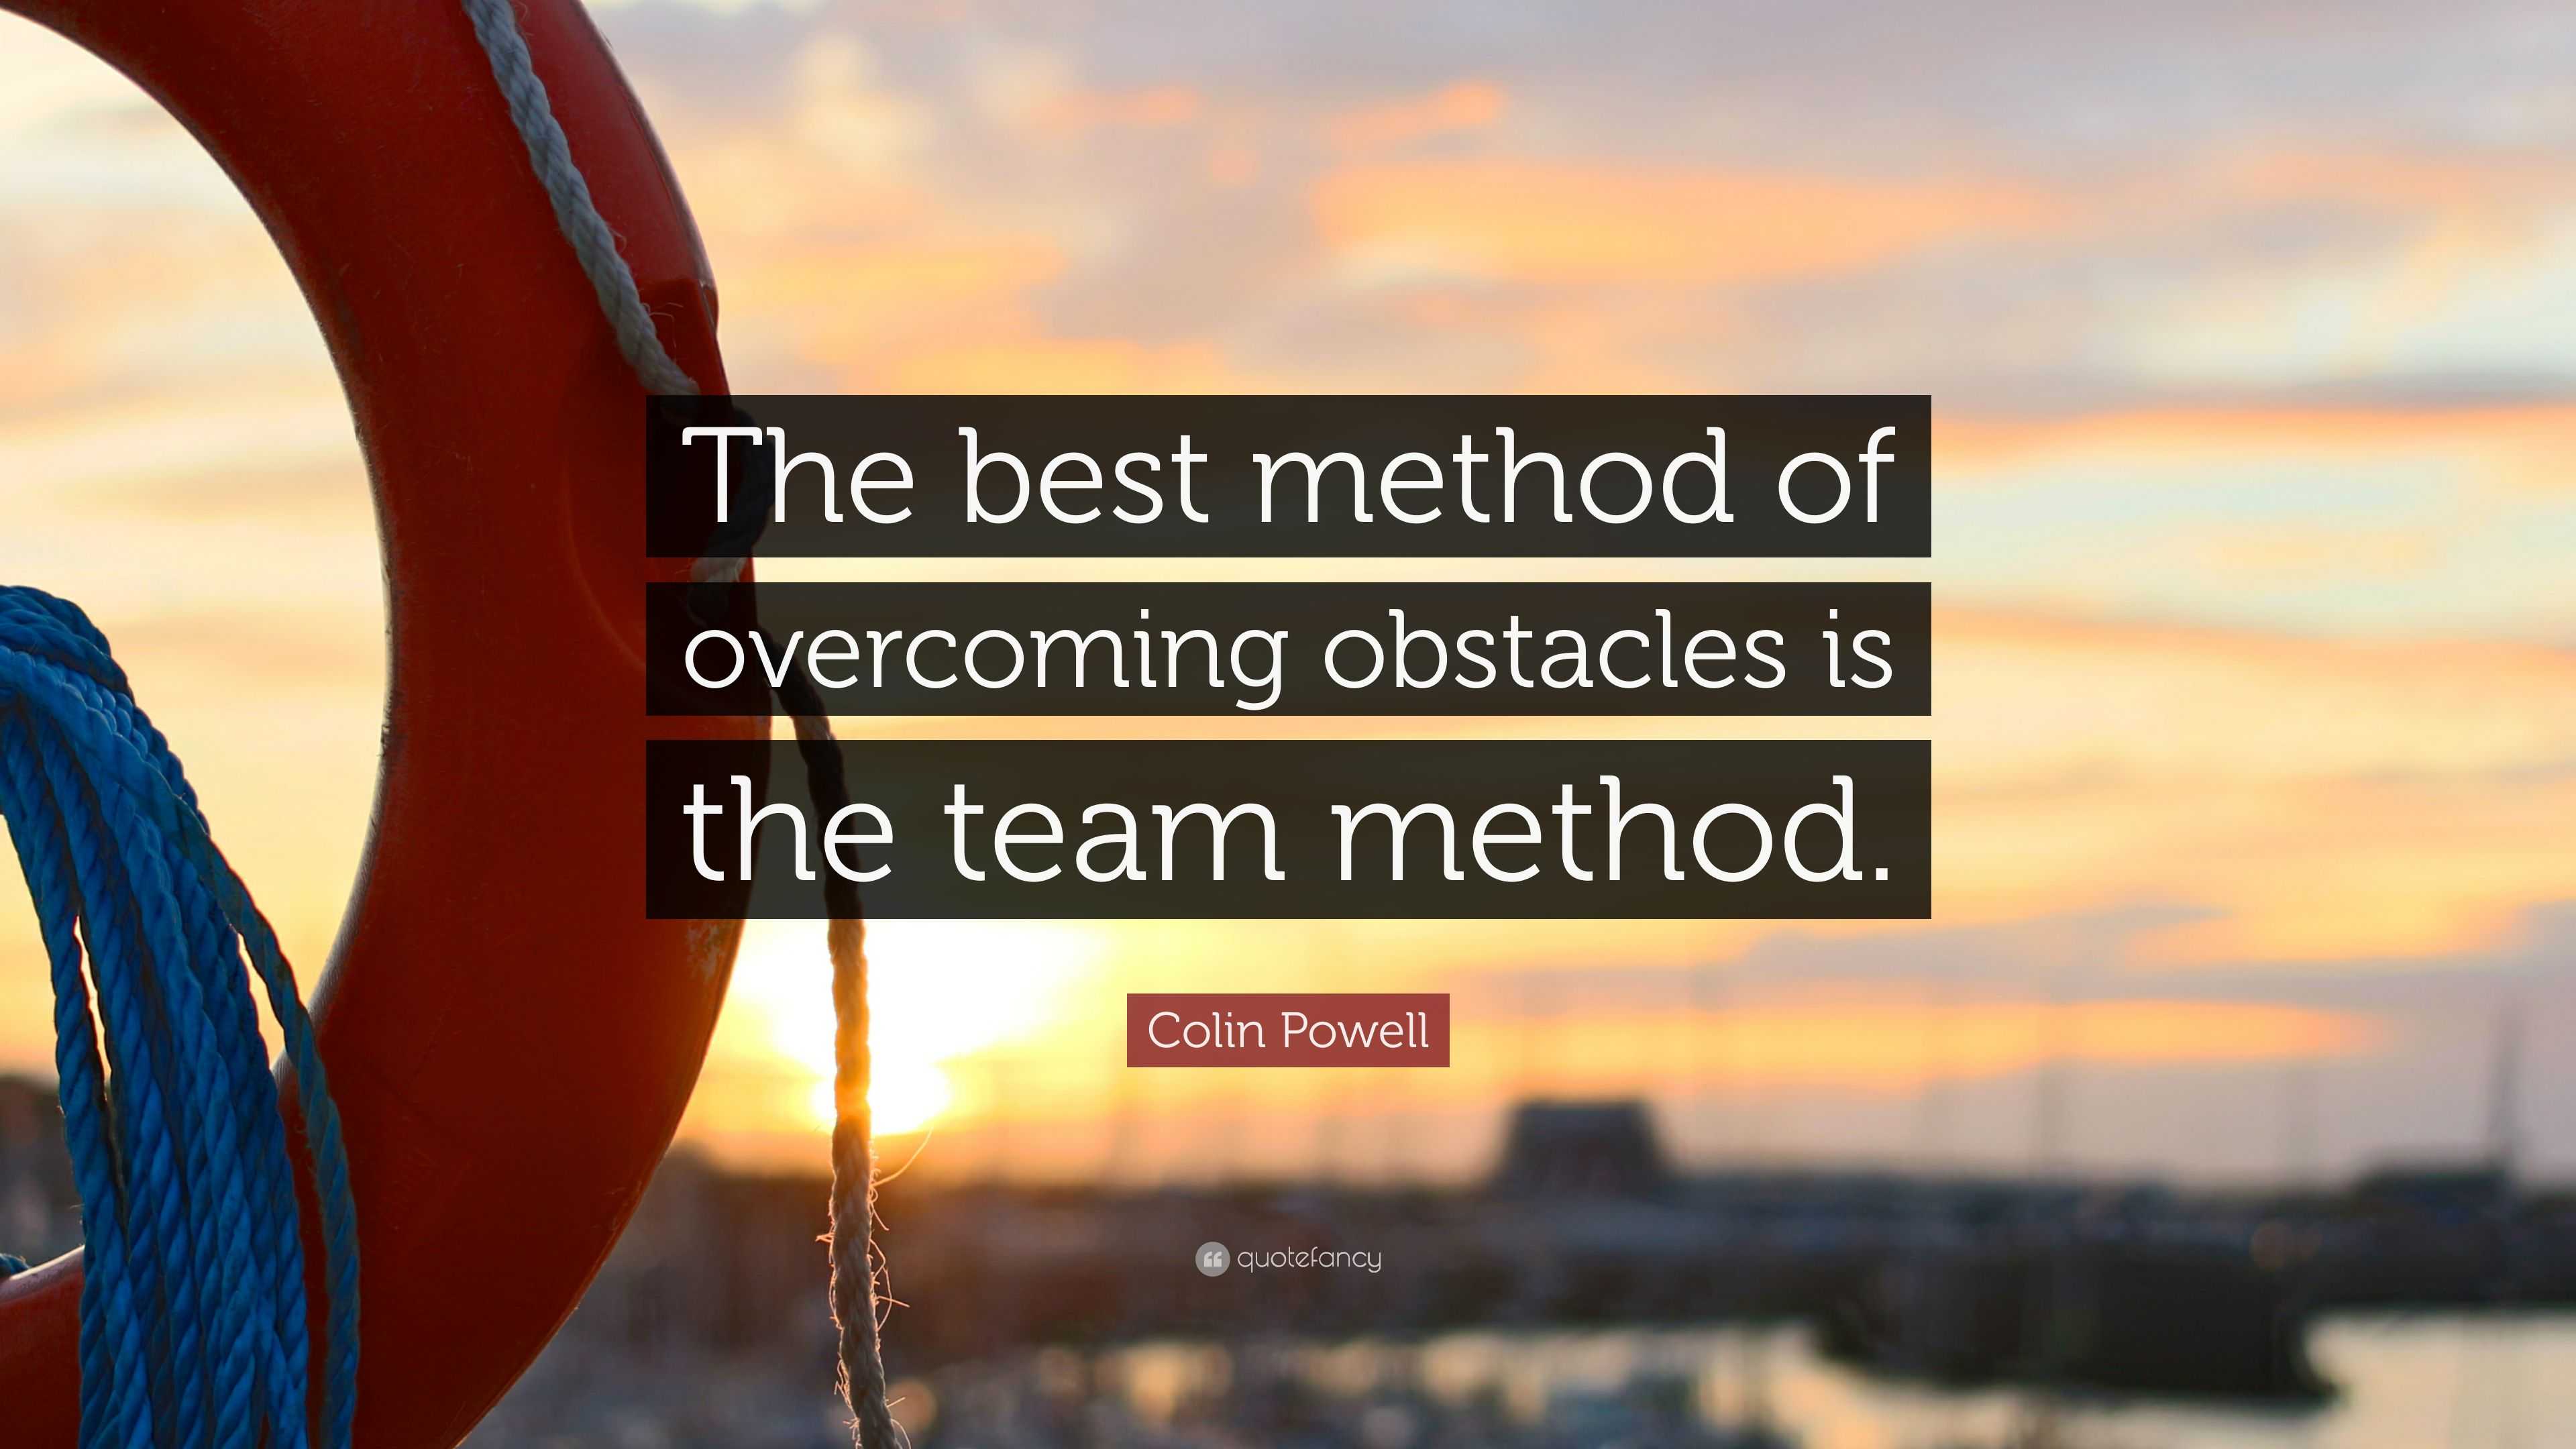 Colin Powell Quote: “The best method of overcoming obstacles is the